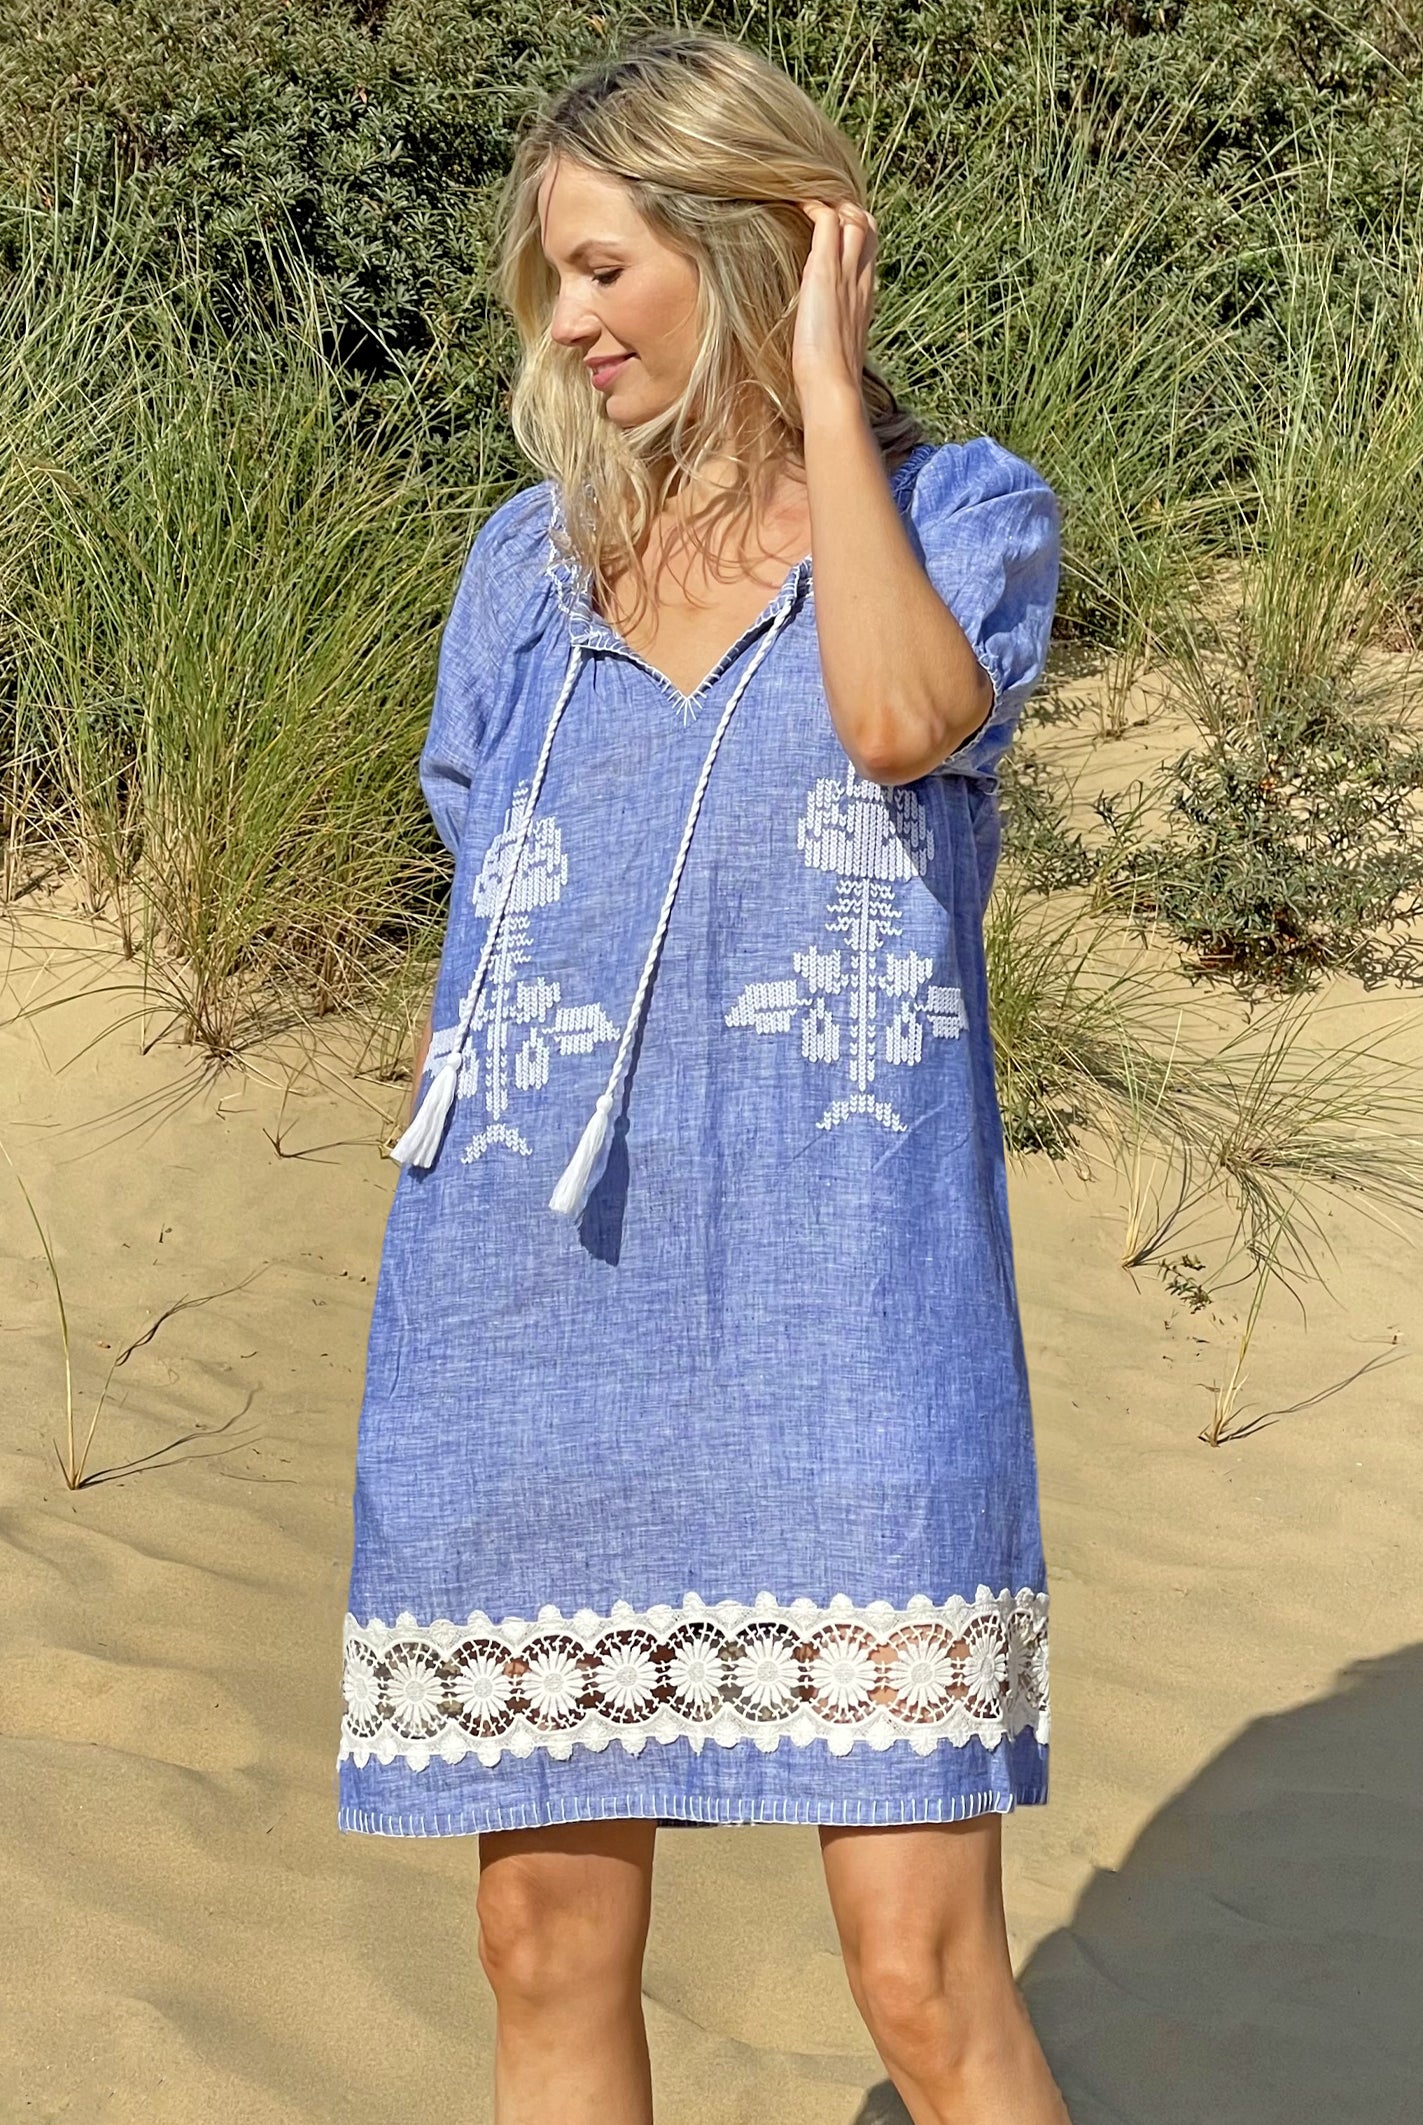 A model on a beach wearing the Rose and Rose Siracusa embroidered blue linen dress.